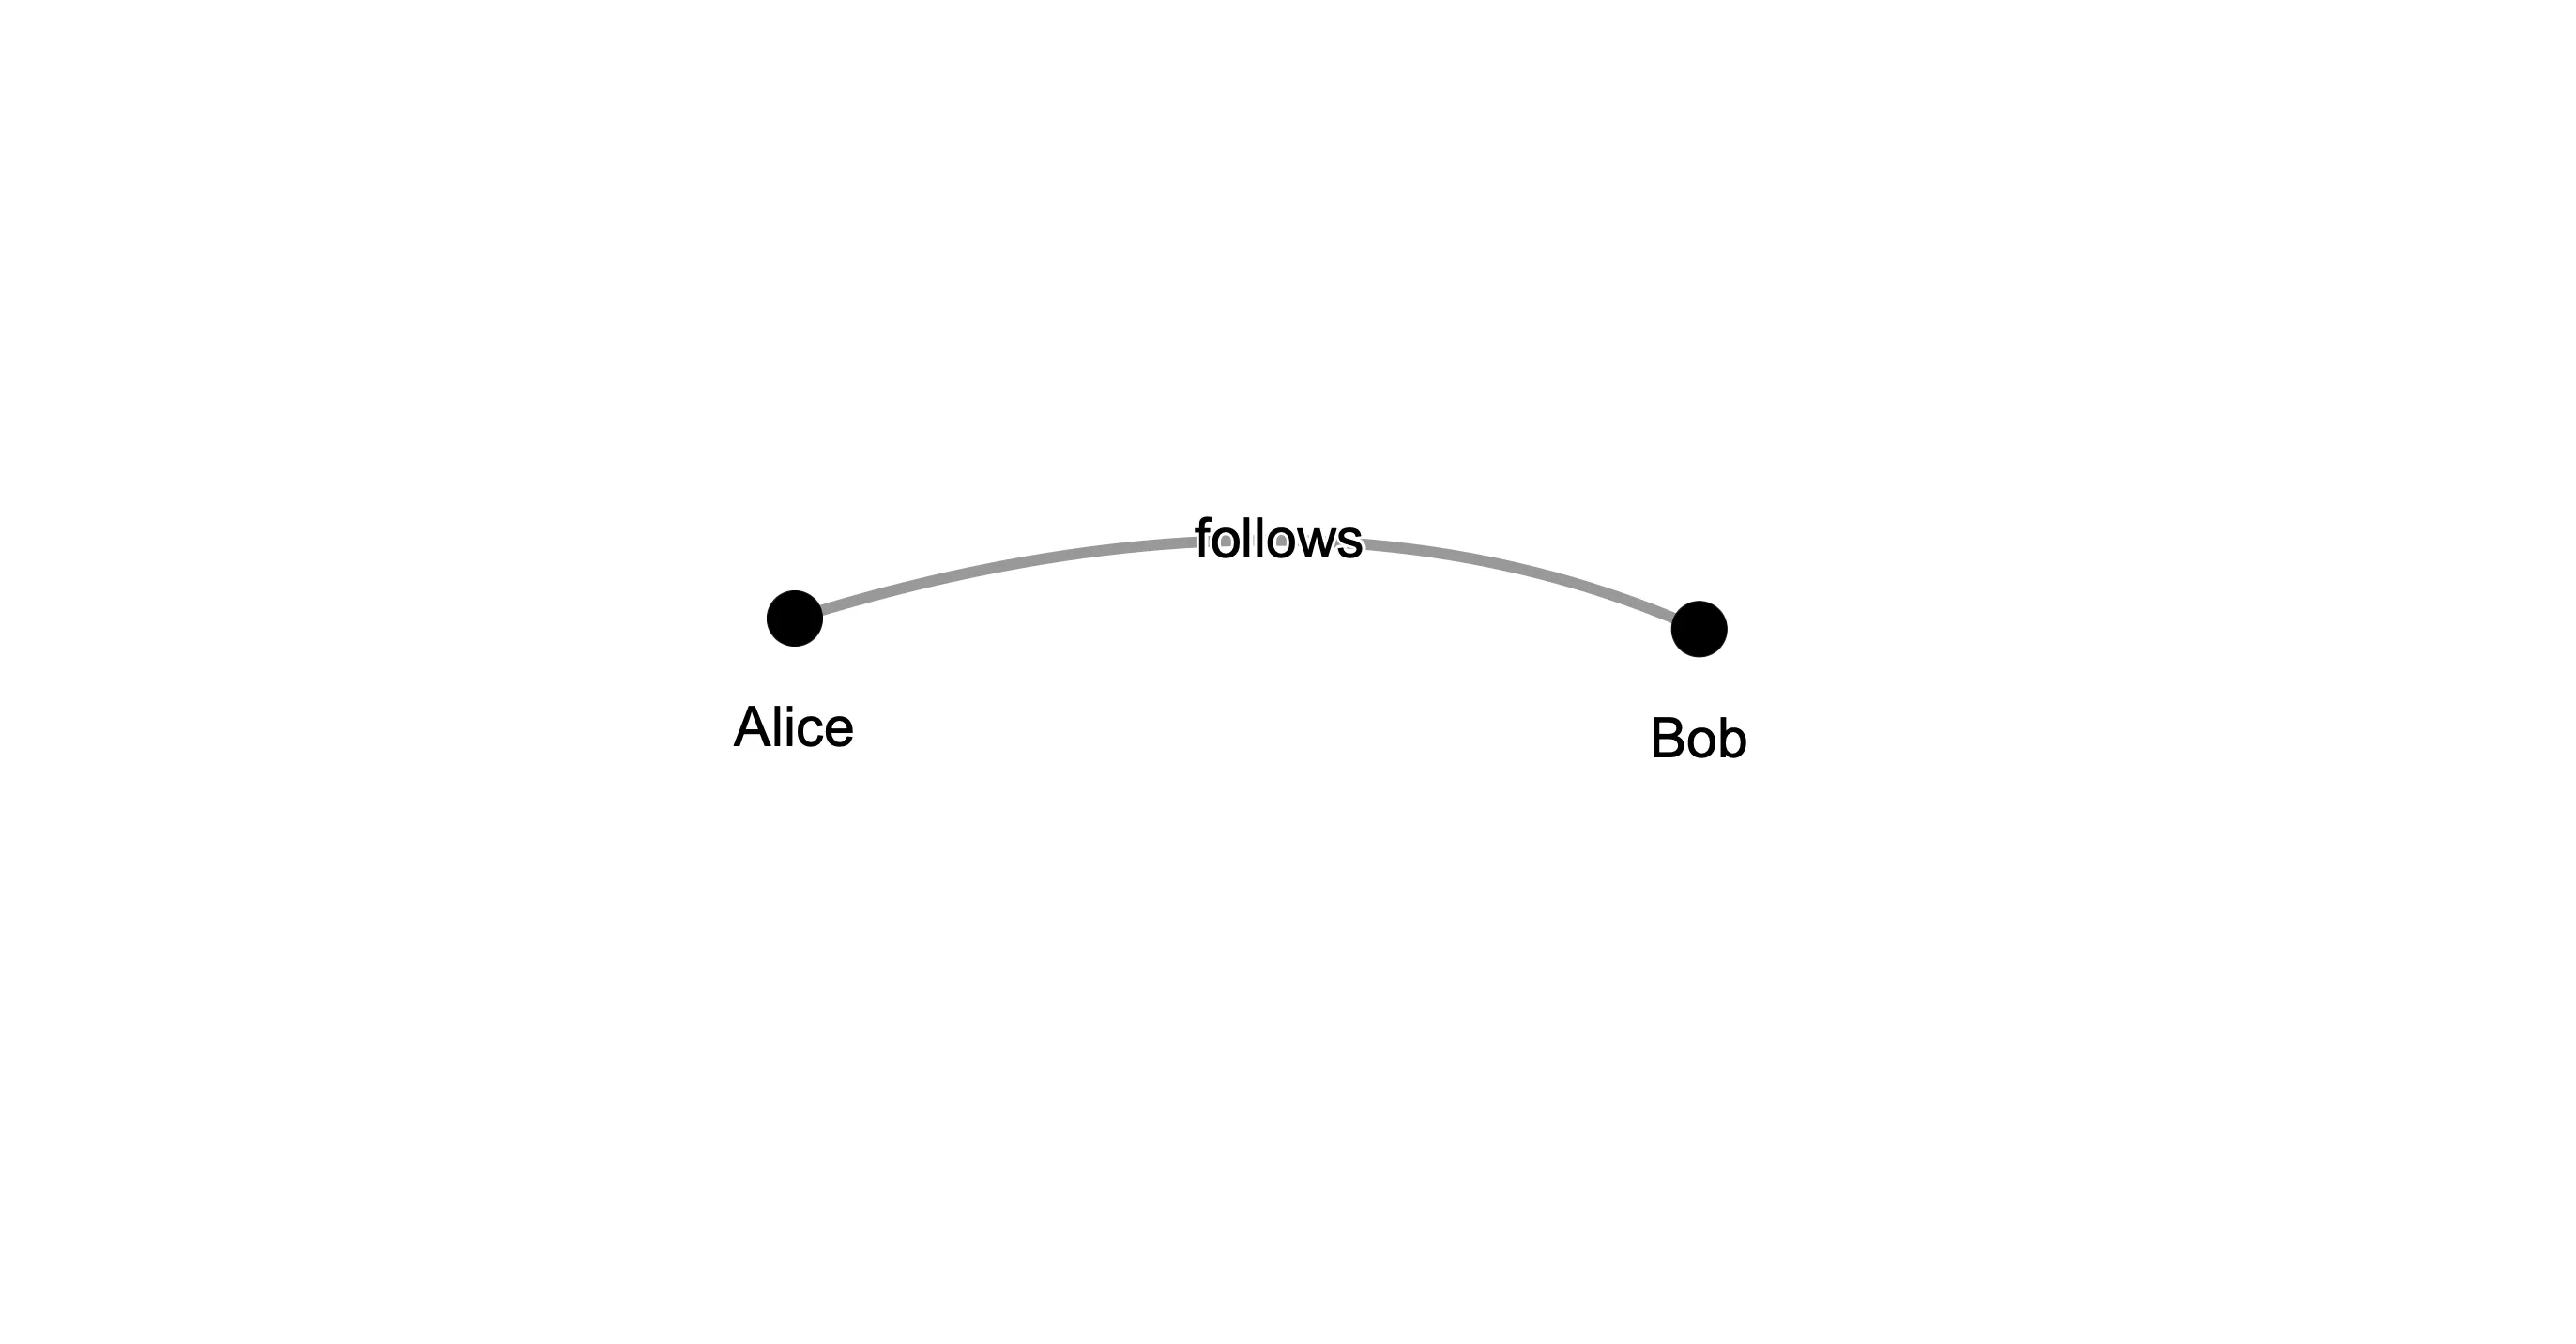 An undirected graph with two nodes labeled Alice and Bob and an line (with no arrow) connecting them.